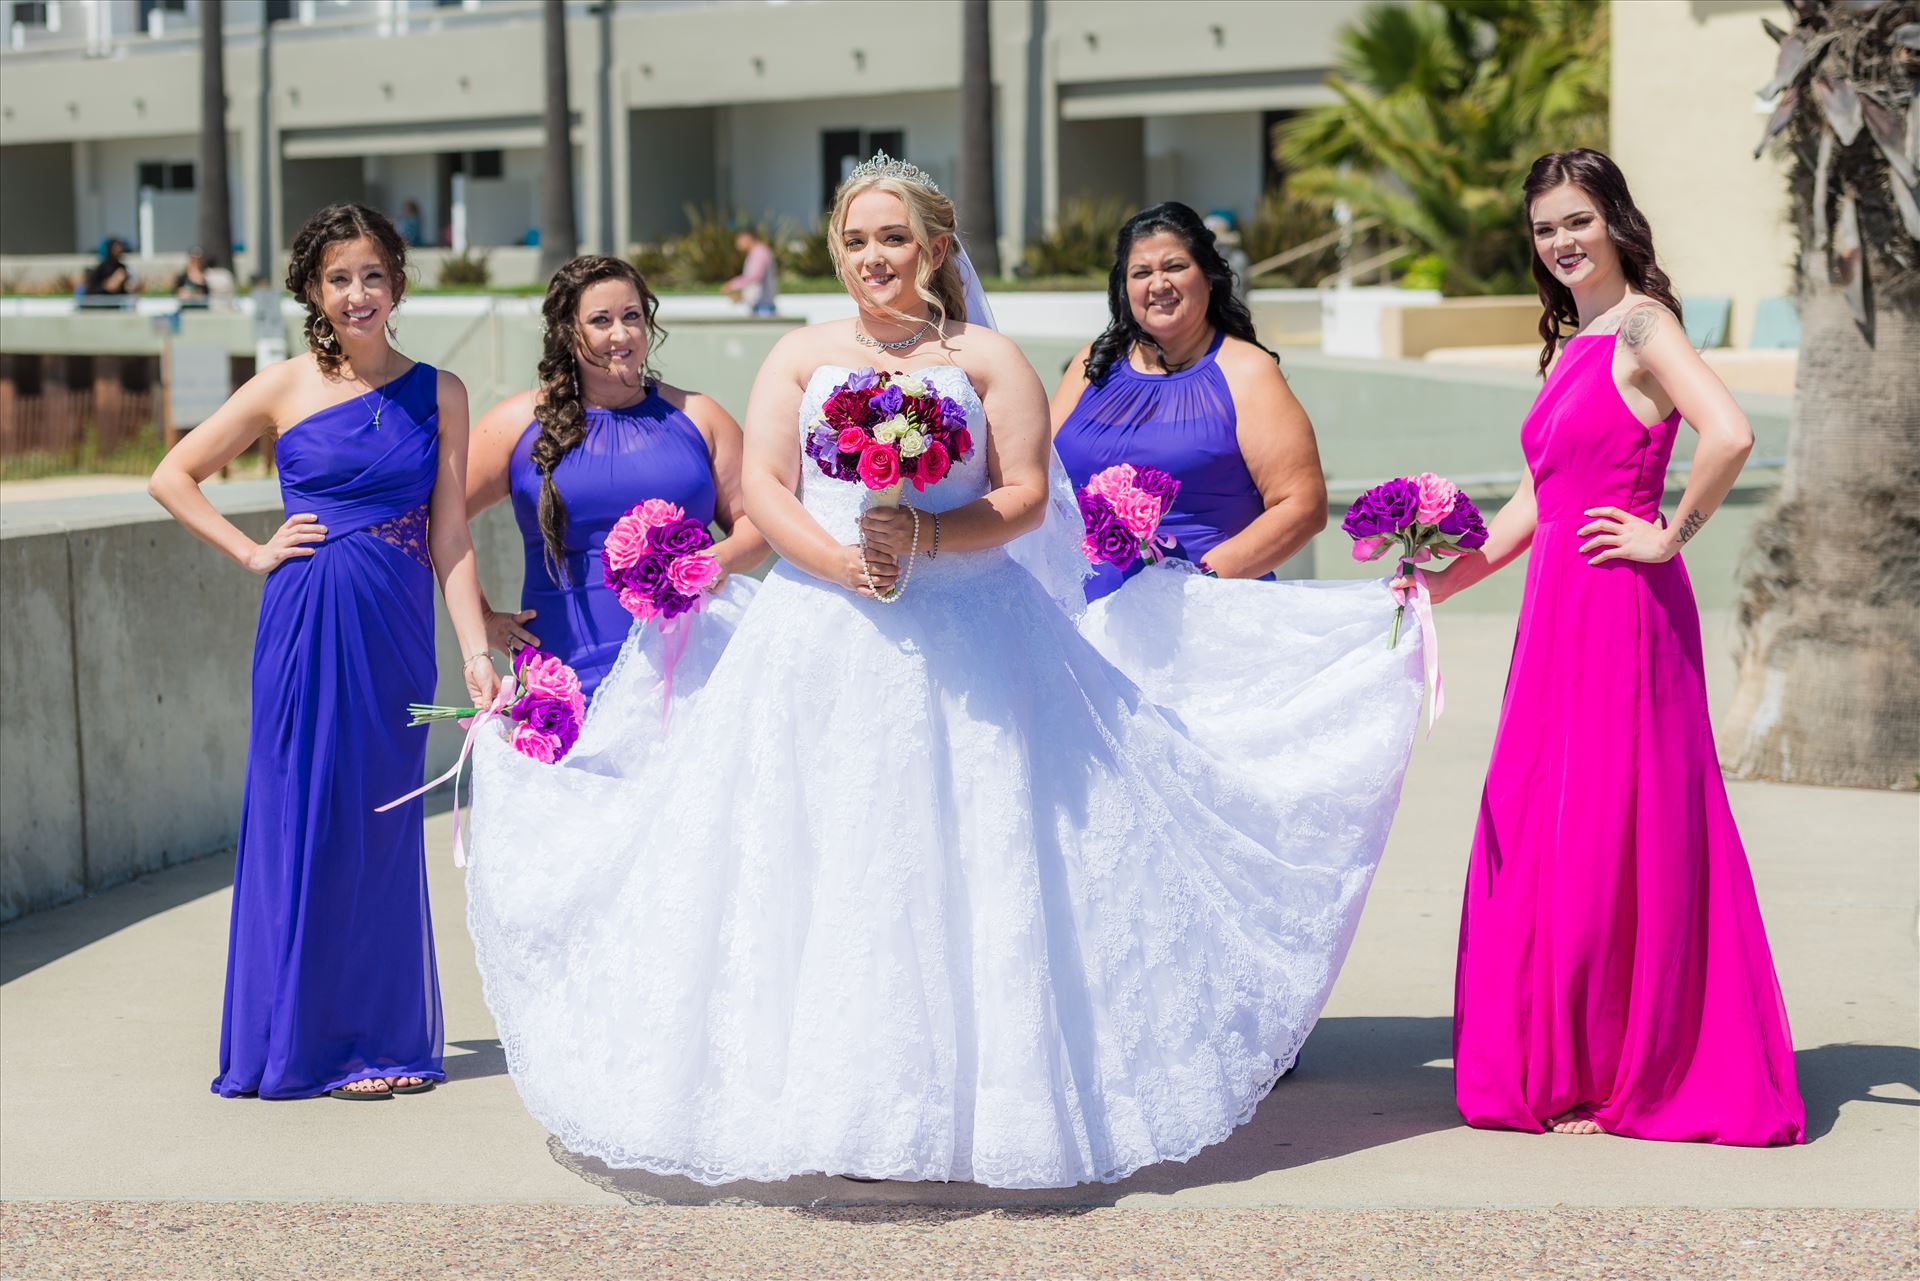 Jessica and Michael 24 - Sea Venture Resort and Spa Wedding Photography by Mirror's Edge Photography in Pismo Beach, California. Bride and her Bridesmaids by Sarah Williams